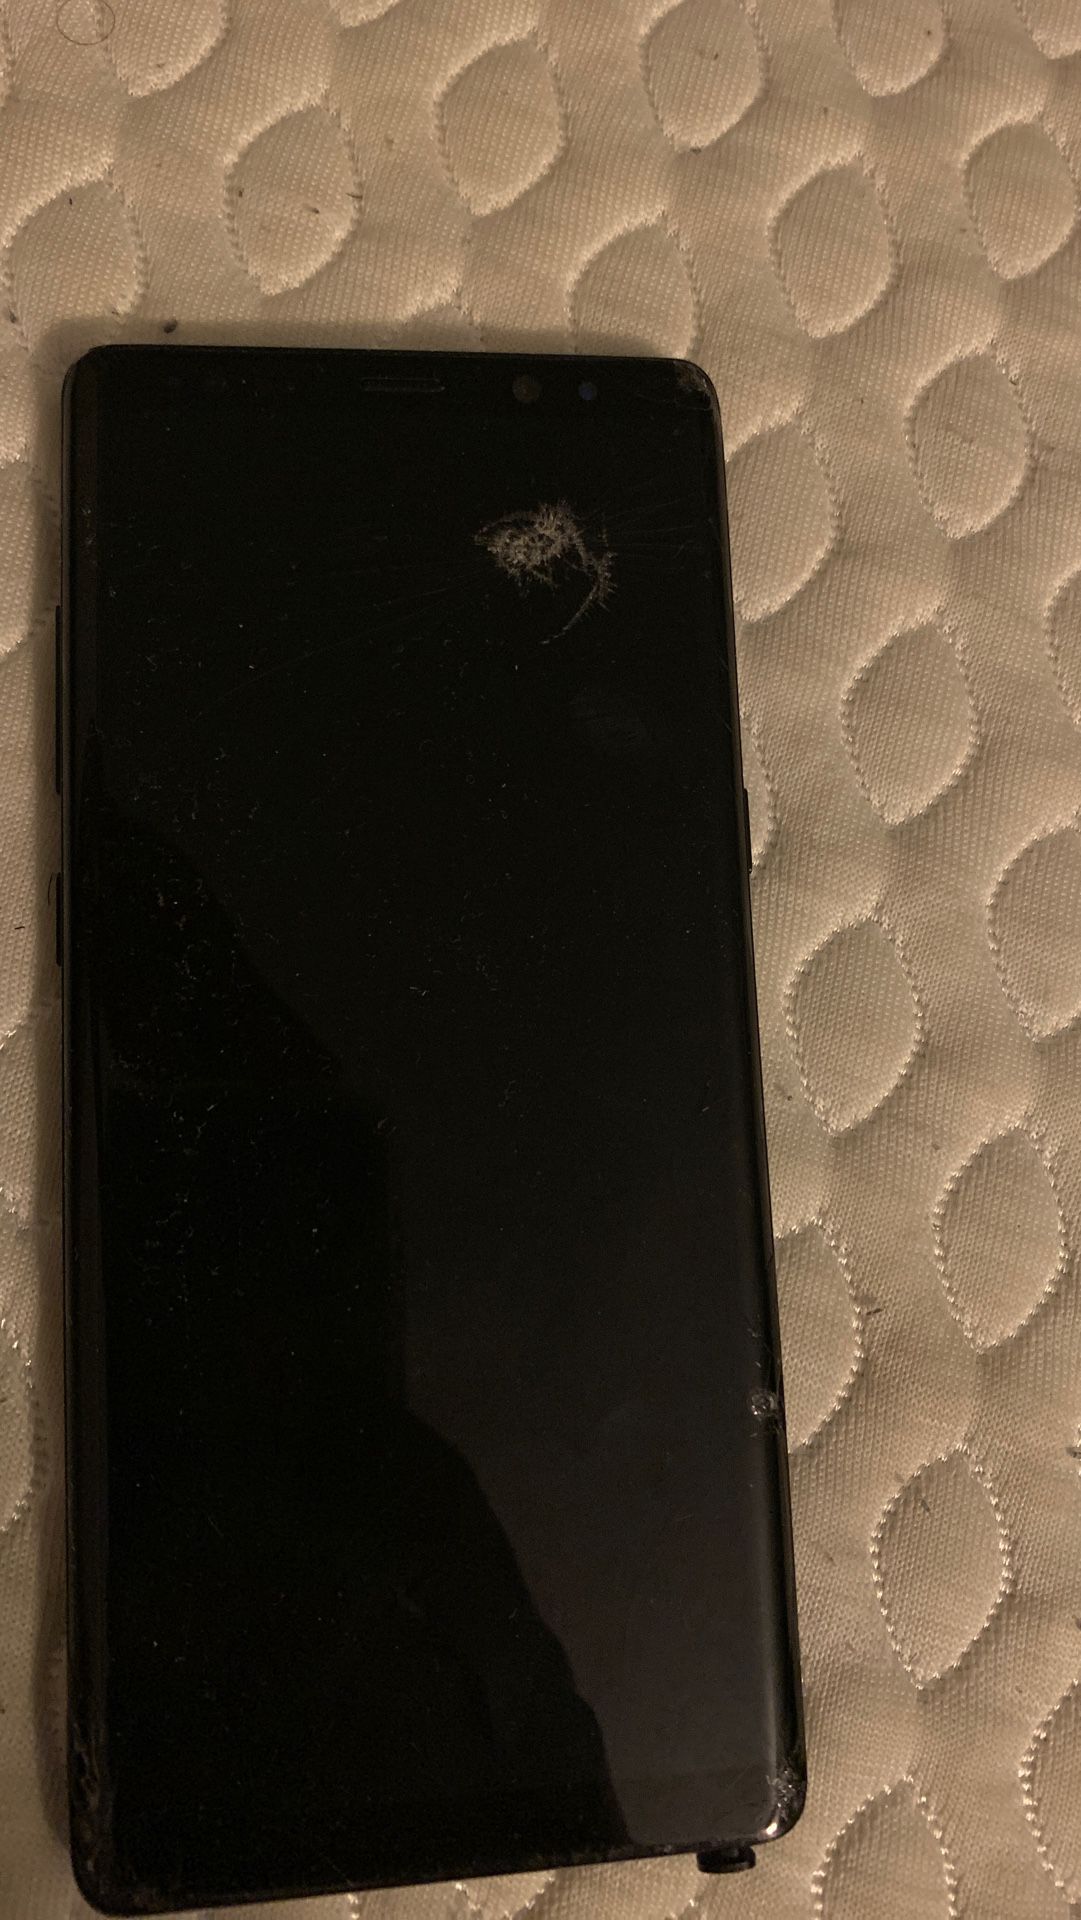 Samsung Galaxy Note 8 CRACKED SCREEN